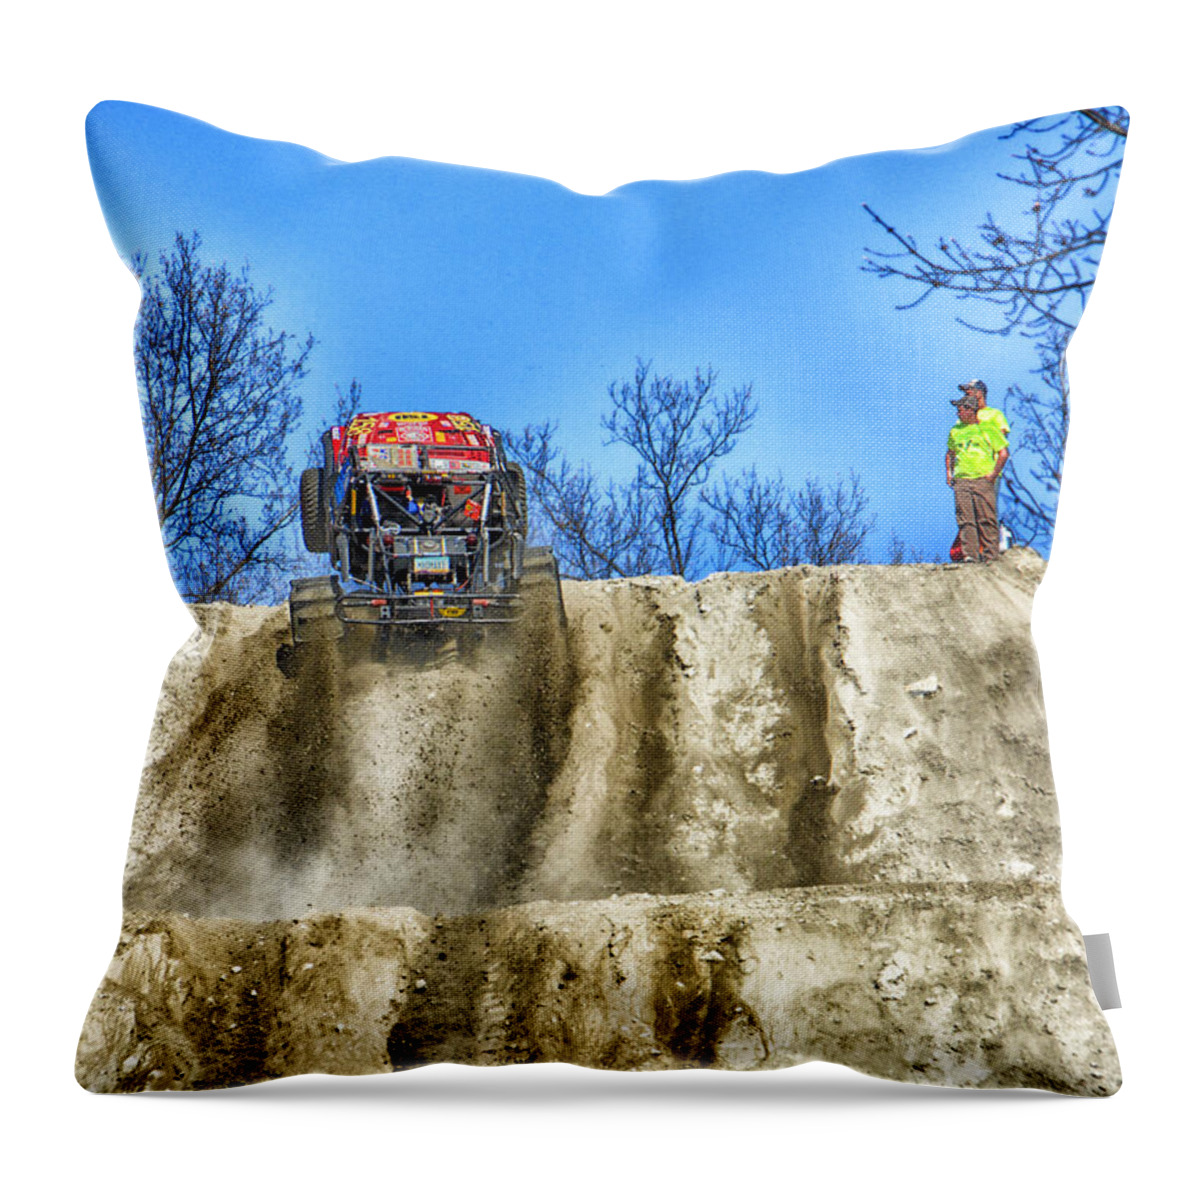 Motorsports Throw Pillow featuring the photograph Over the Top by Mike Martin